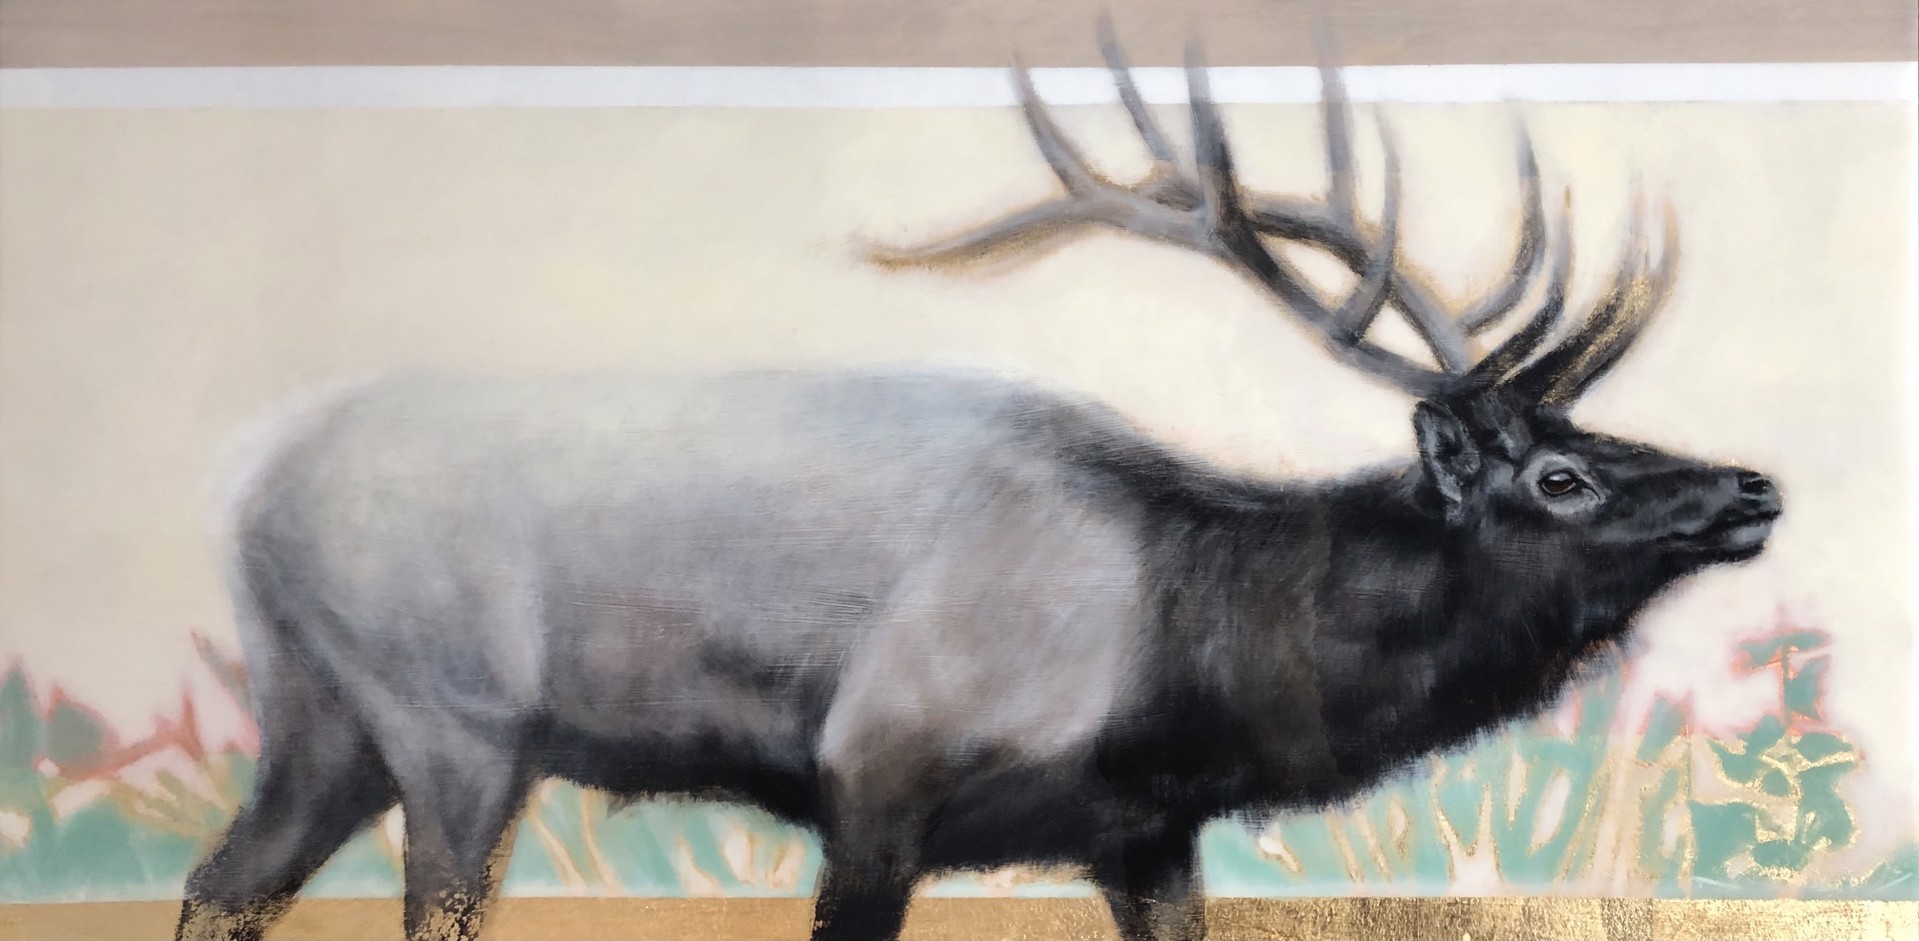 Original Artwork Featuring an Elk With Contemporary Graphic Background And Gold Leaf Detail